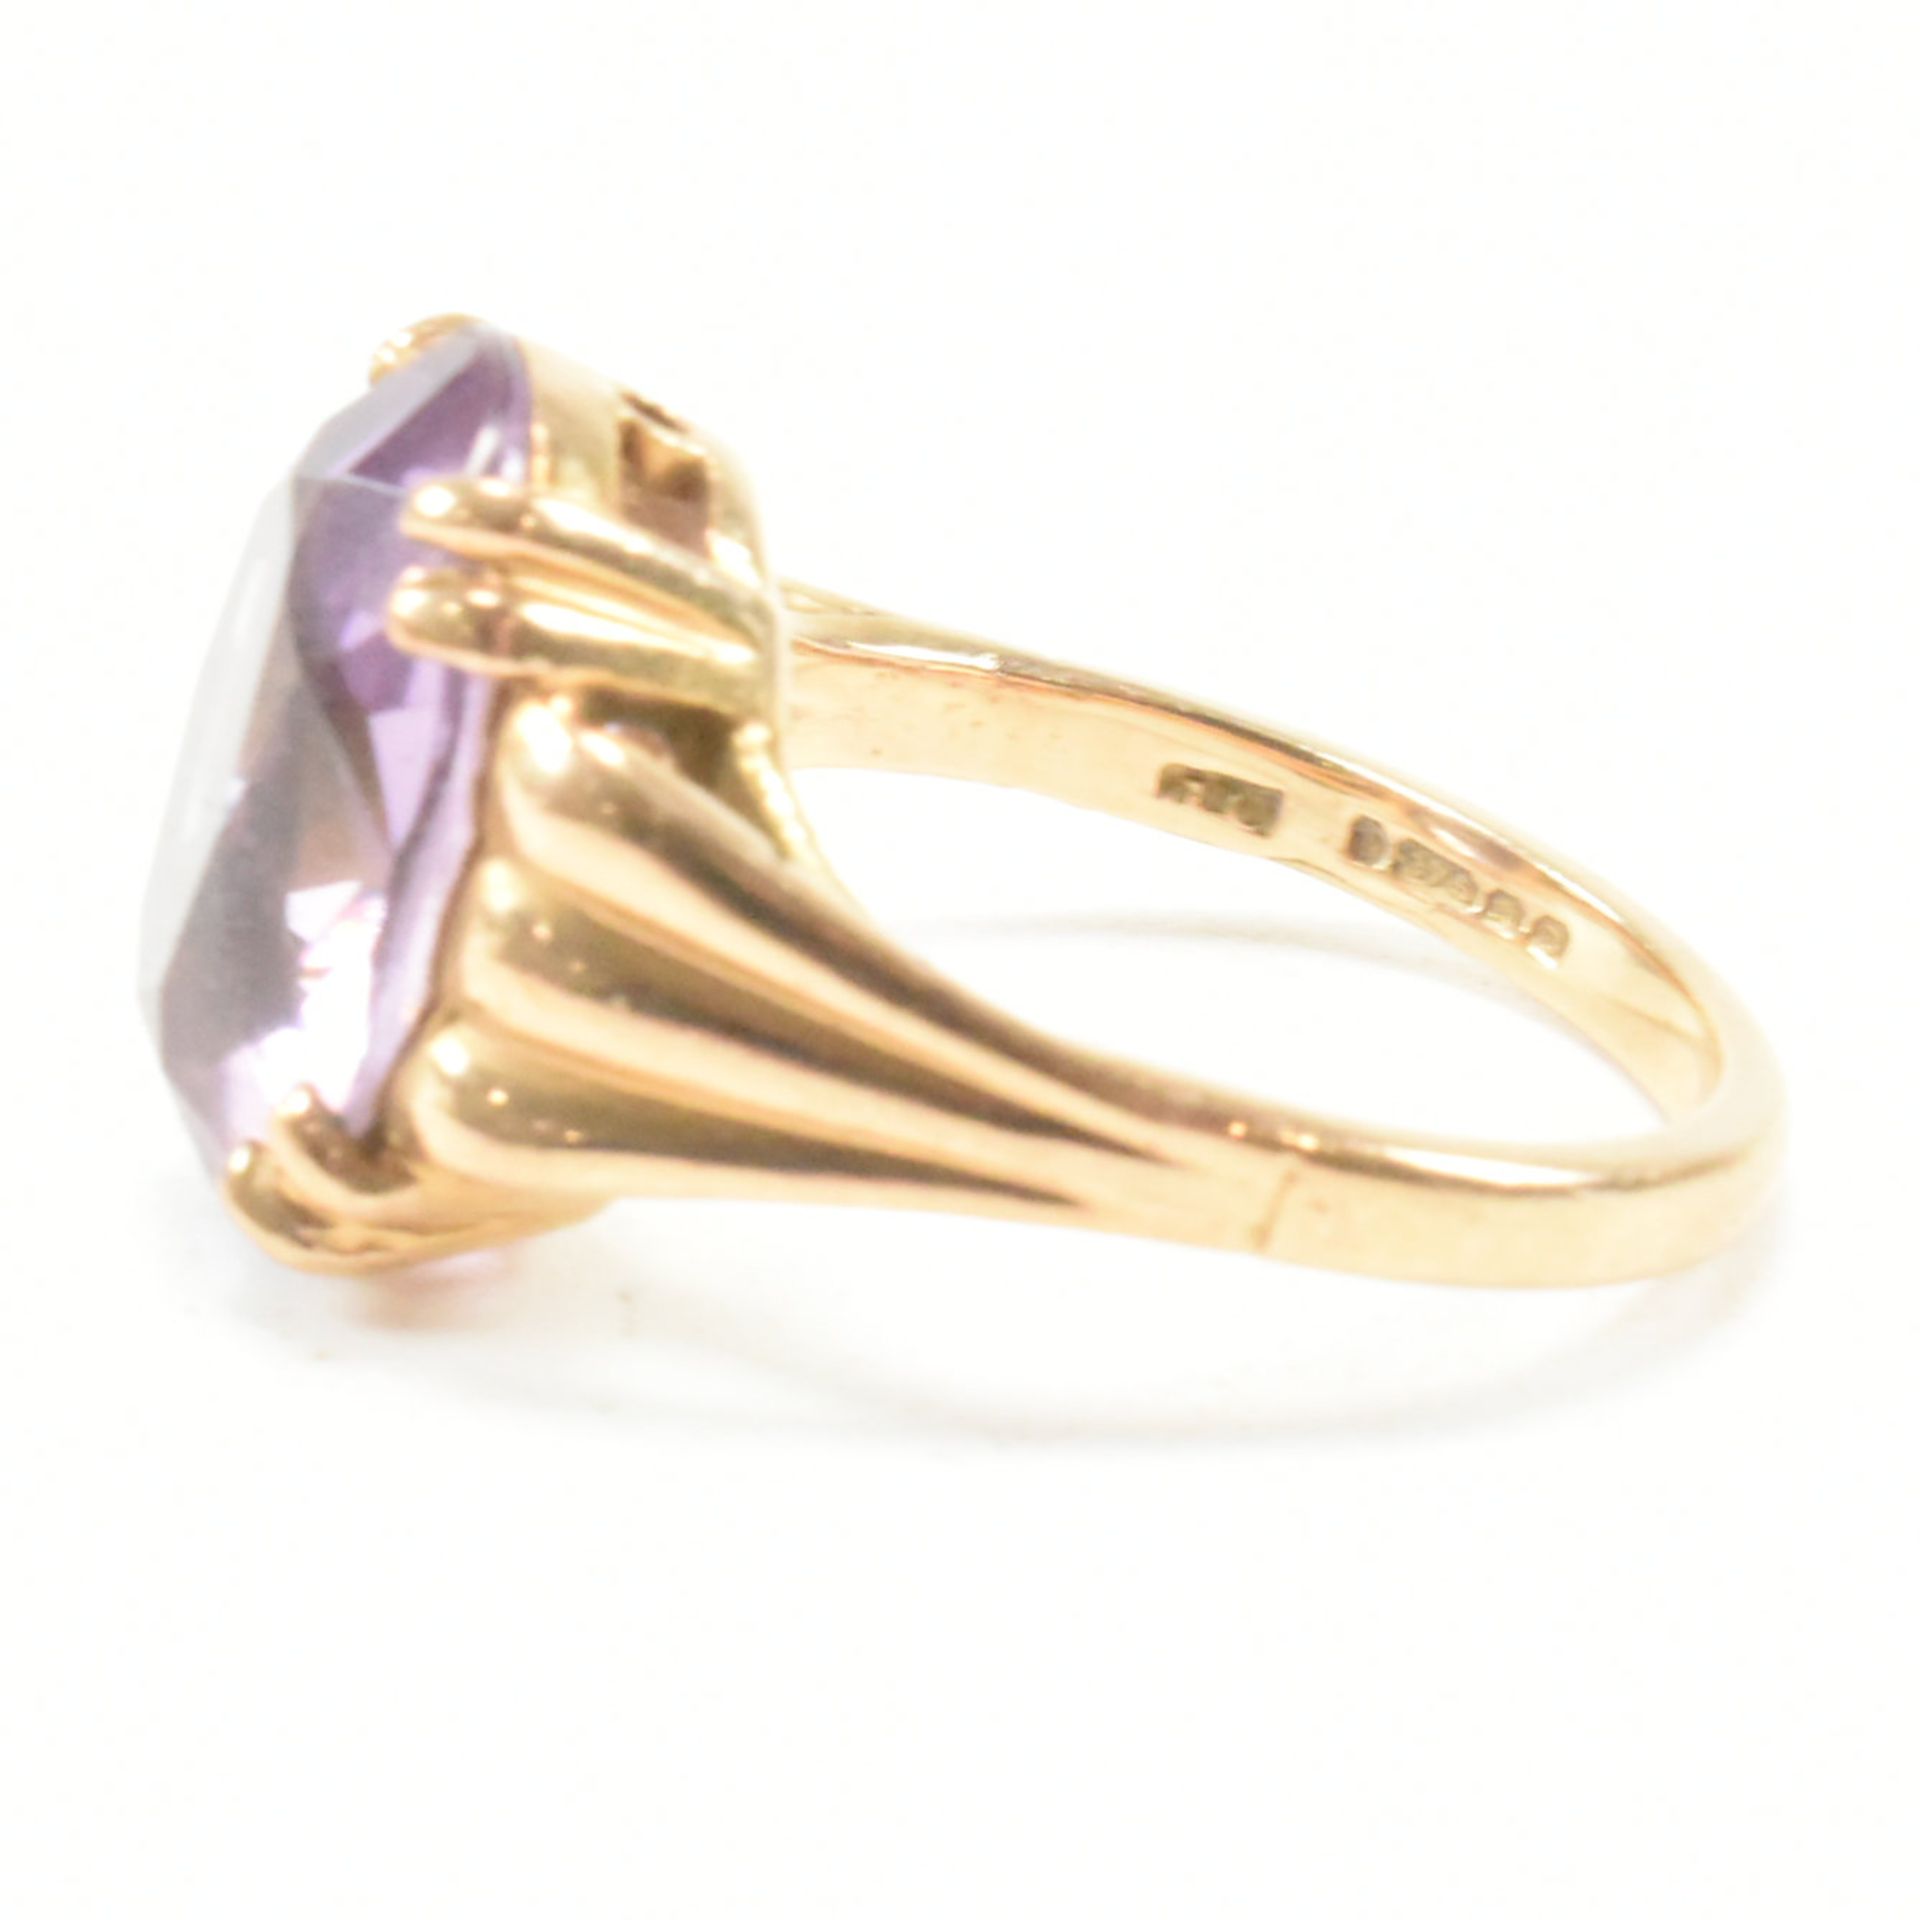 VINTAGE HALLMARKED 9CT GOLD & AMETHYST SOLITAIRE RING - Image 8 of 9